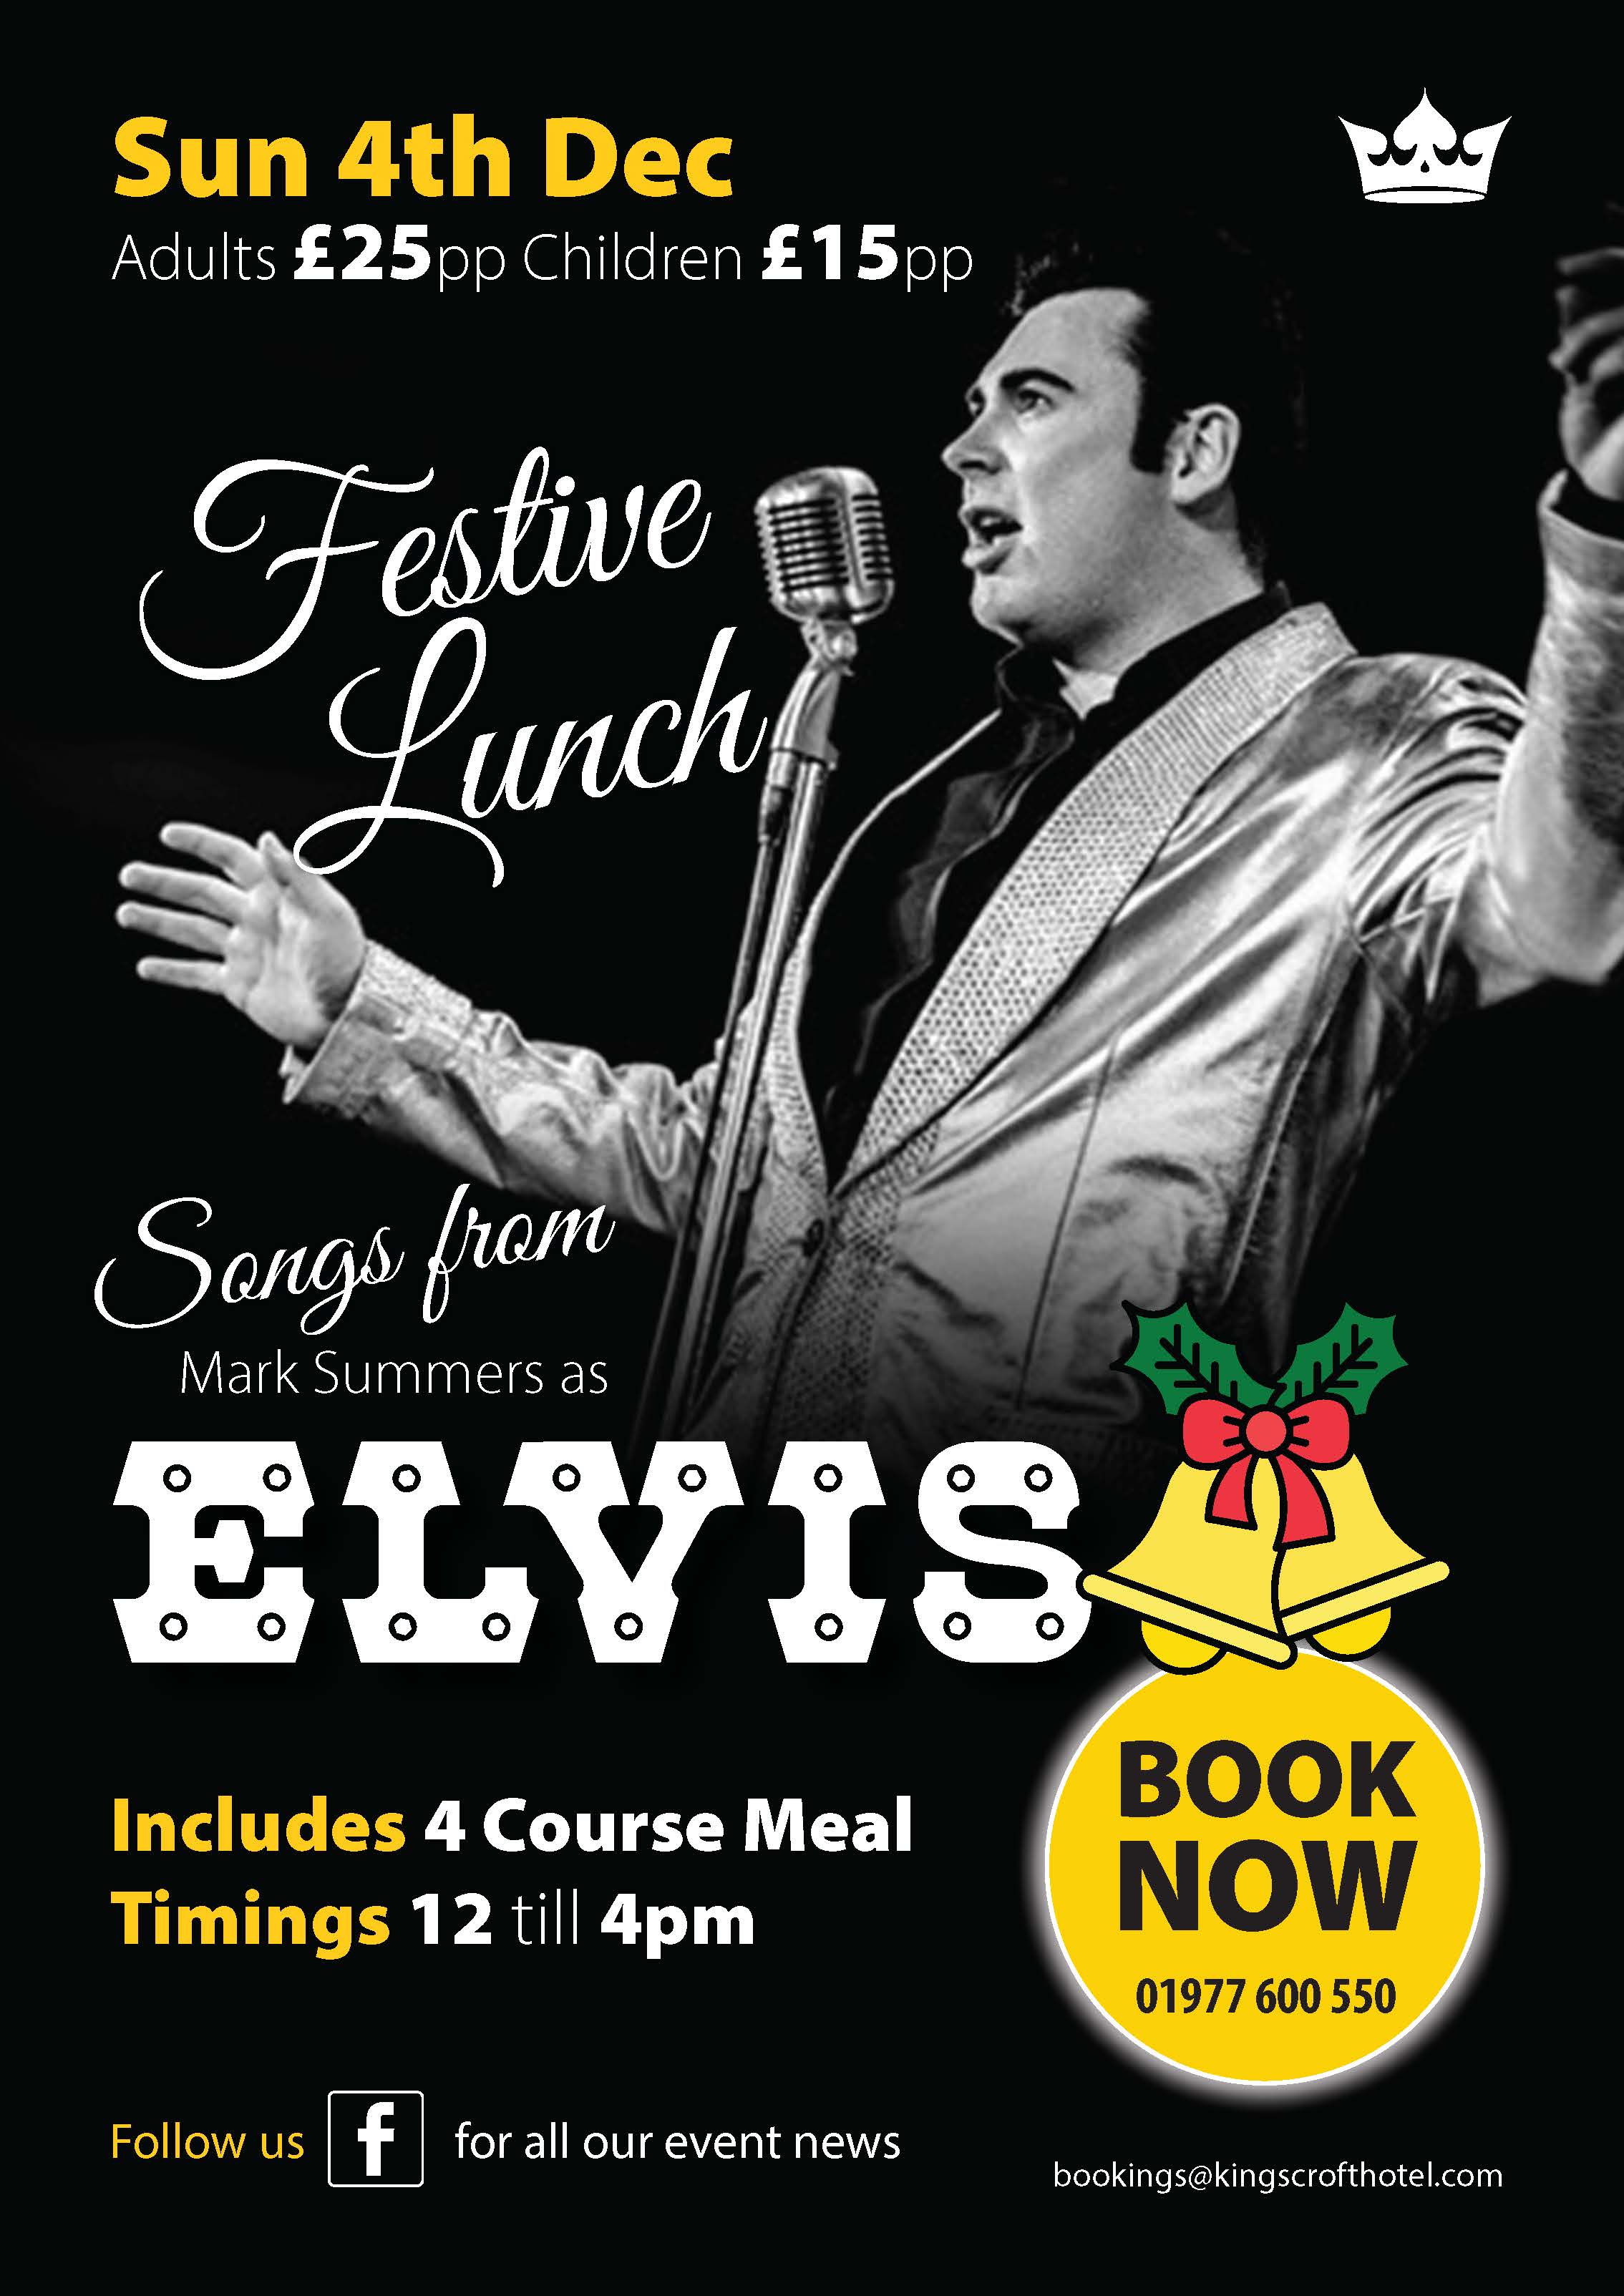 Lunch with Elvis